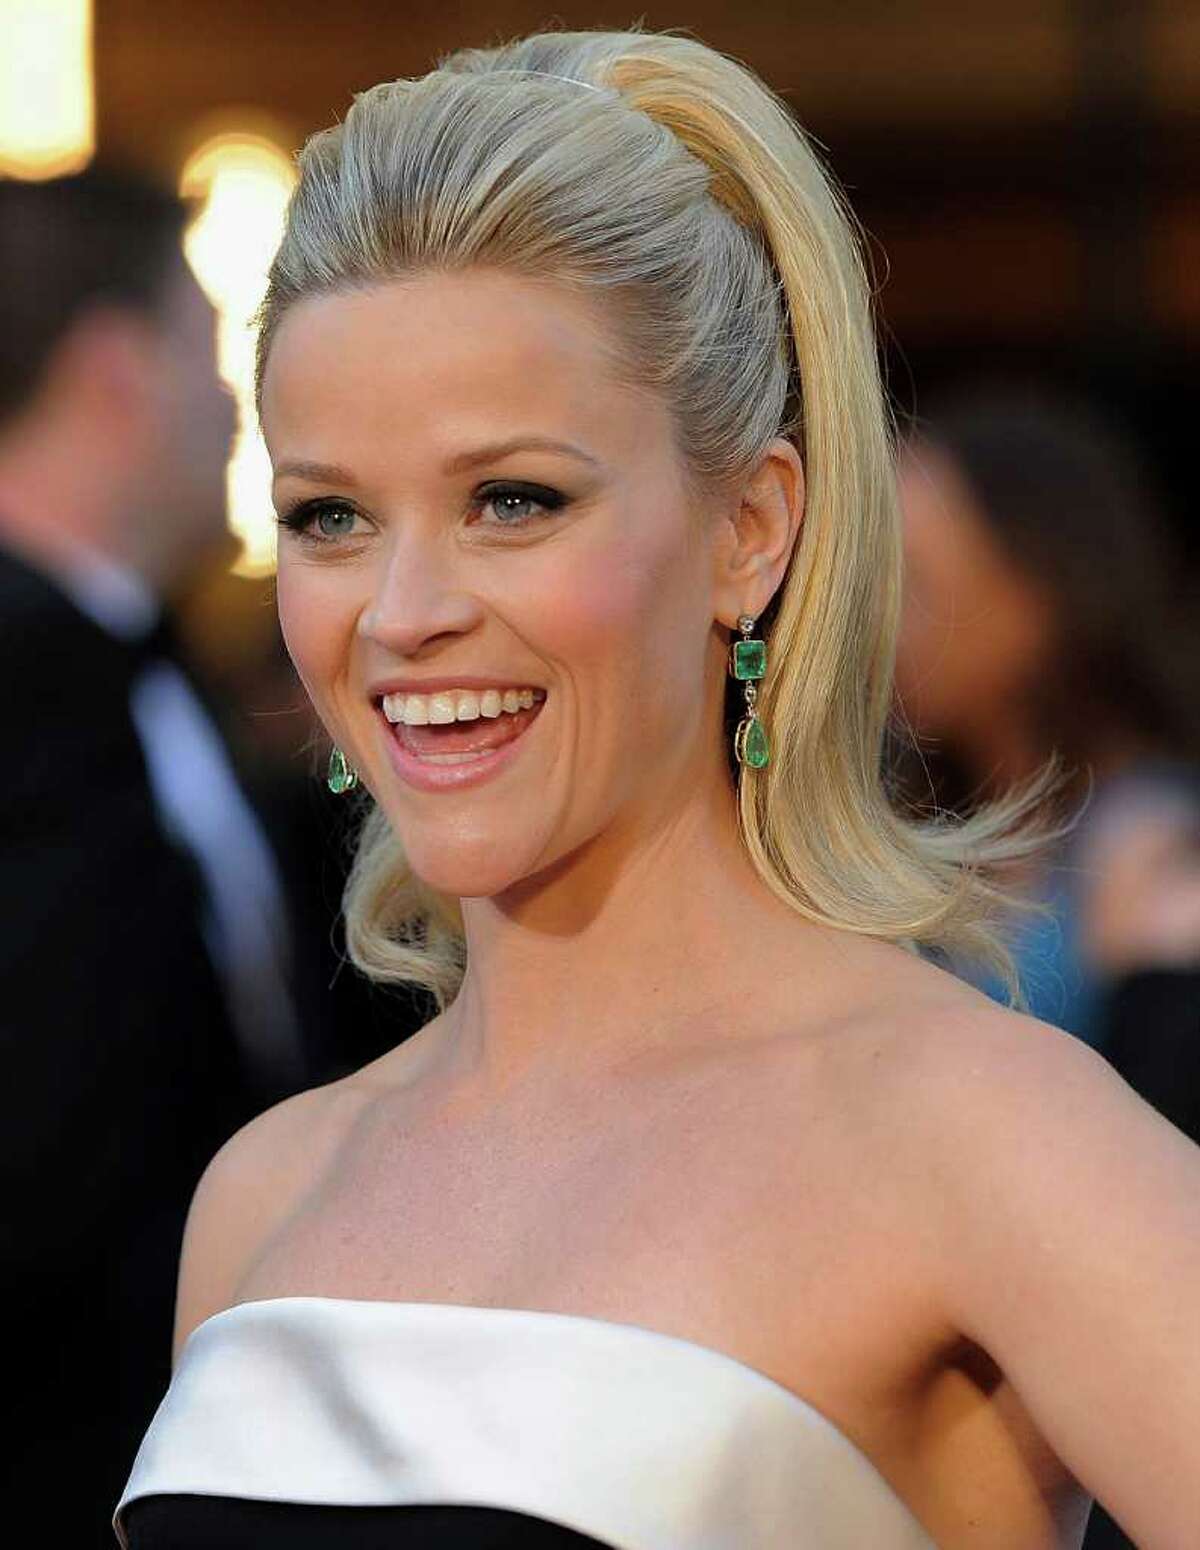 FILE - In this Feb. 27, 2011 file photo, Reese Witherspoon arrives before the 83rd Academy Awards in the Hollywood section of Los Angeles. A spokeswoman for Witherspoon says the star wed her fiance, Hollywood agent Jim Toth, Saturday, March 26, 2011 in Ojai, Calif., about 90 miles north of Los Angeles. (AP Photo/Chris Pizzello, File)